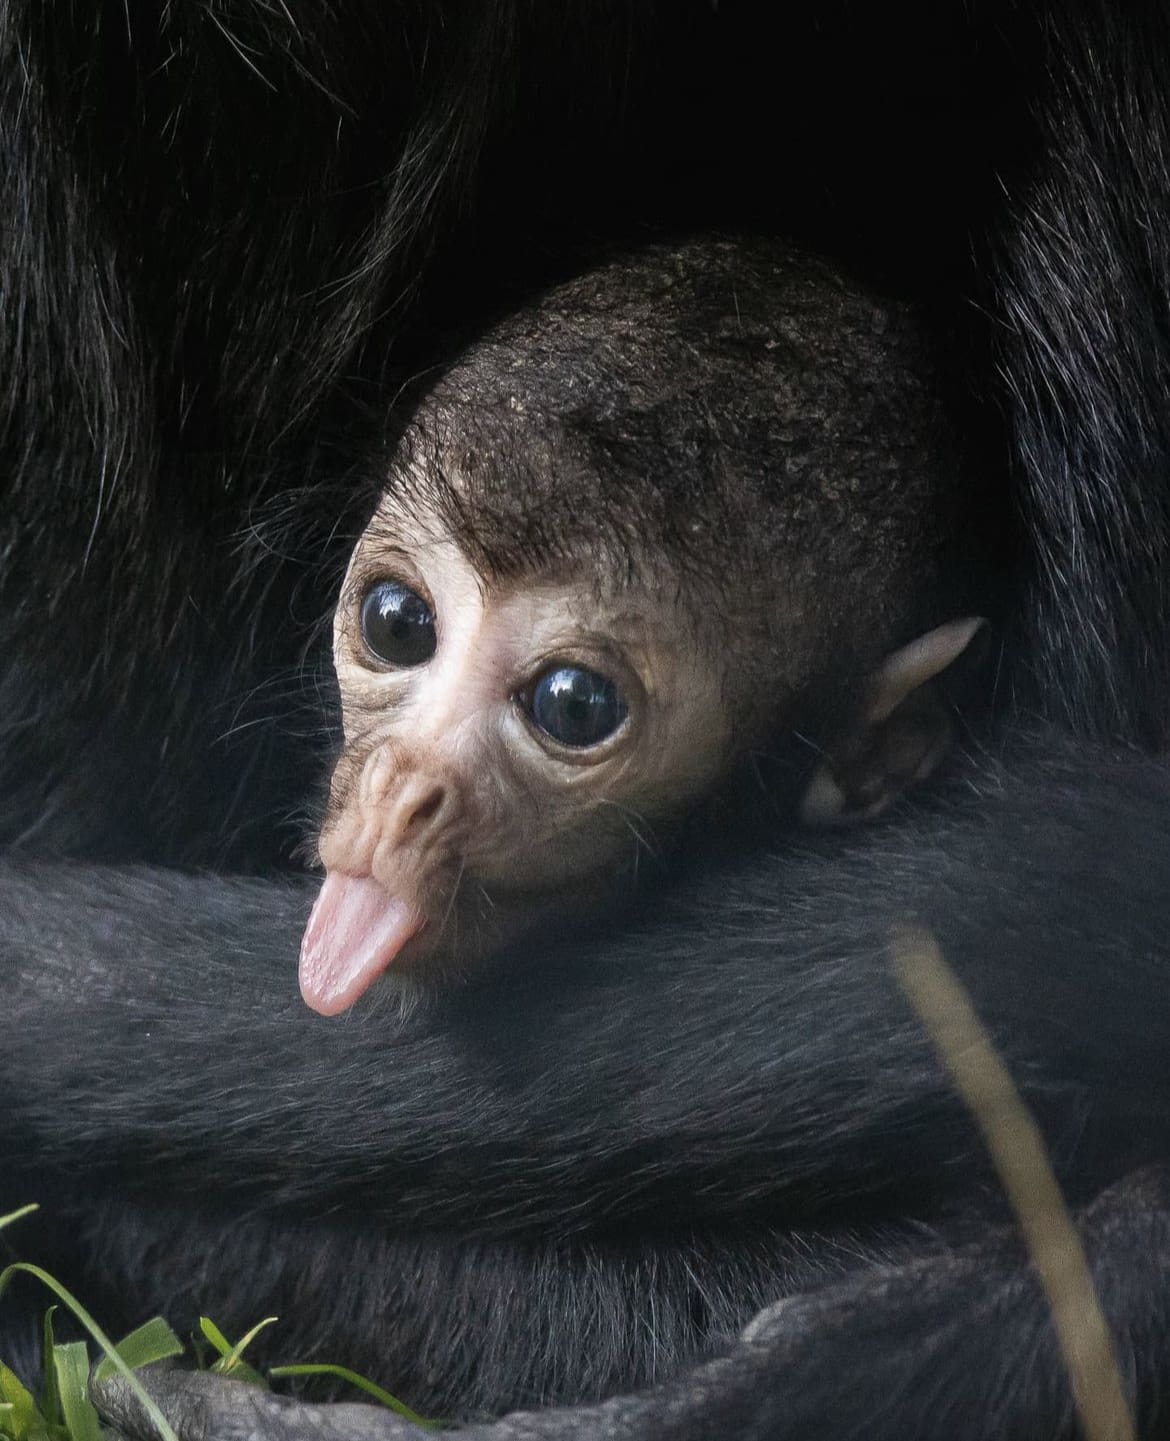 Cheeky monkey sticking its tongue out